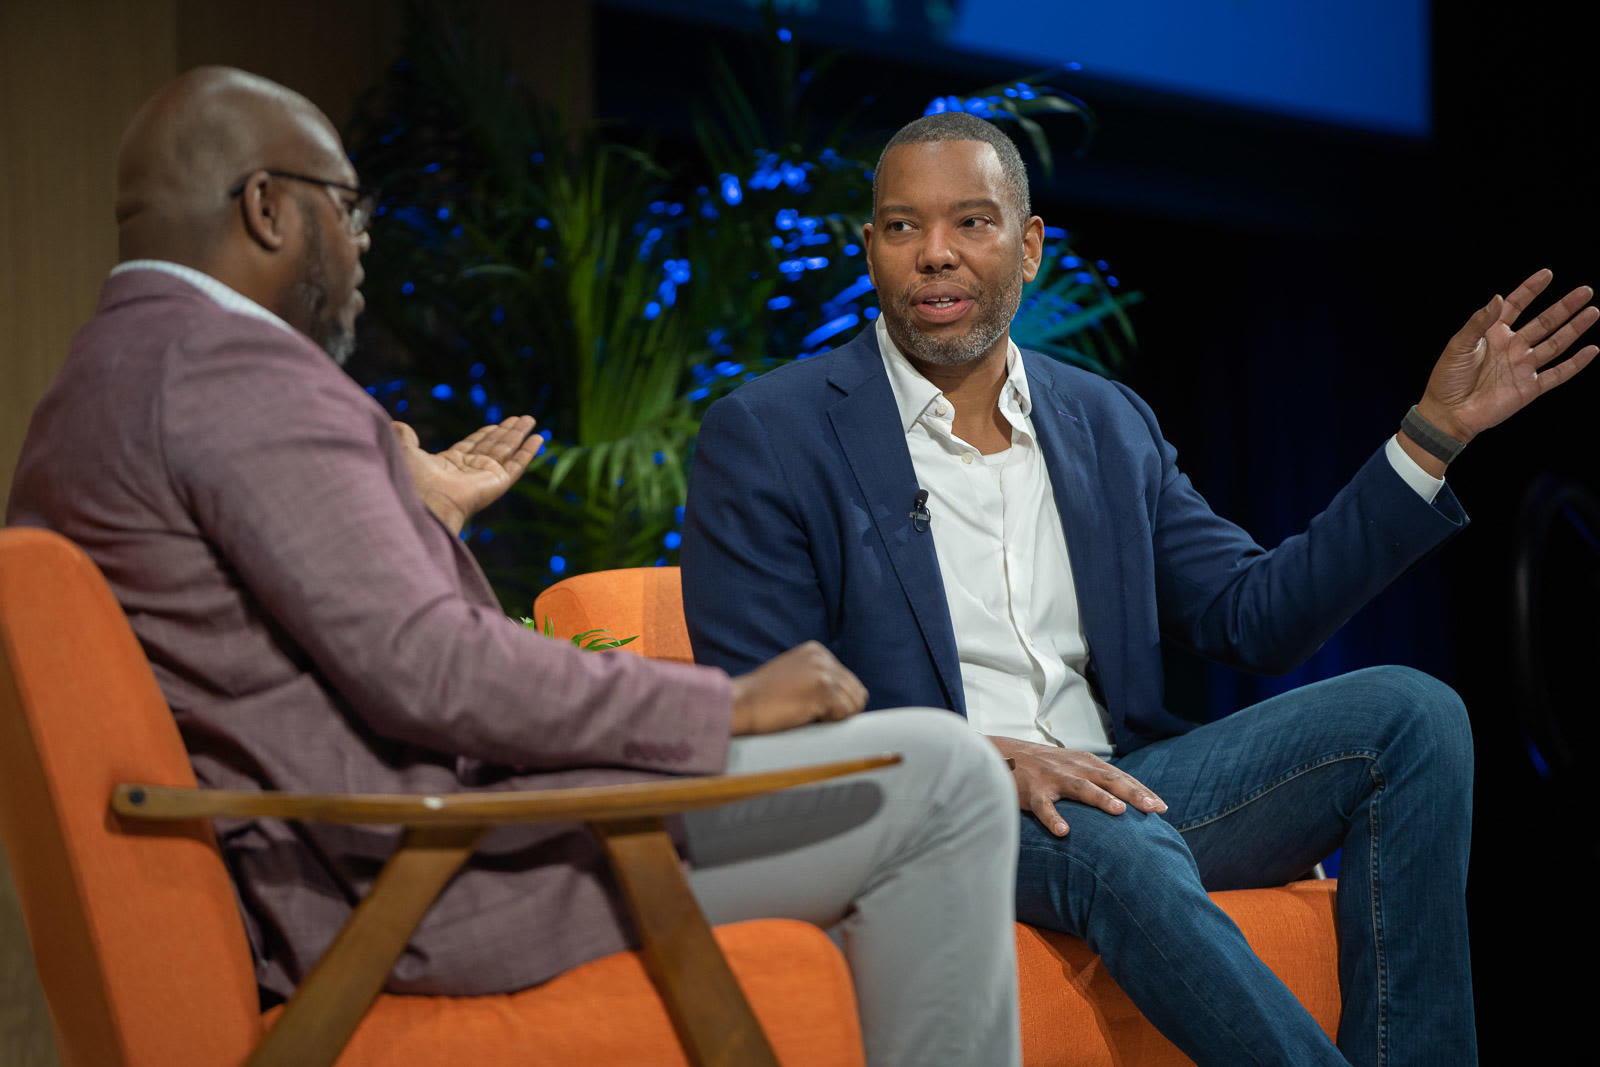 Ta-Nehisi Coates on "apartheid" Israel and support for Gaza